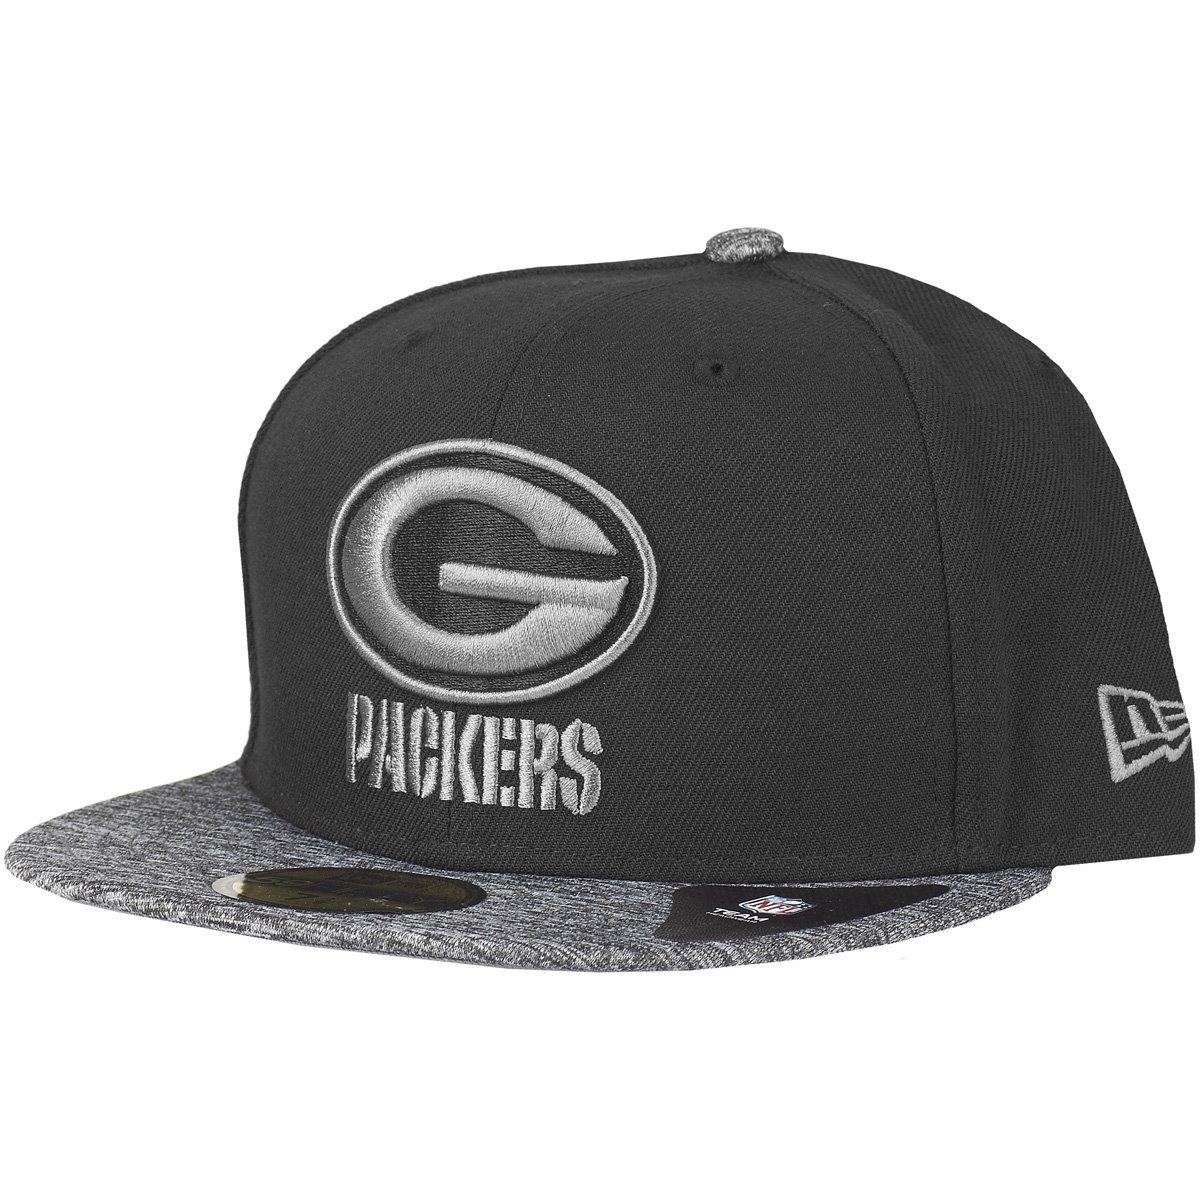 Cap Era Bay II GREY 59Fifty New Green Packers Fitted